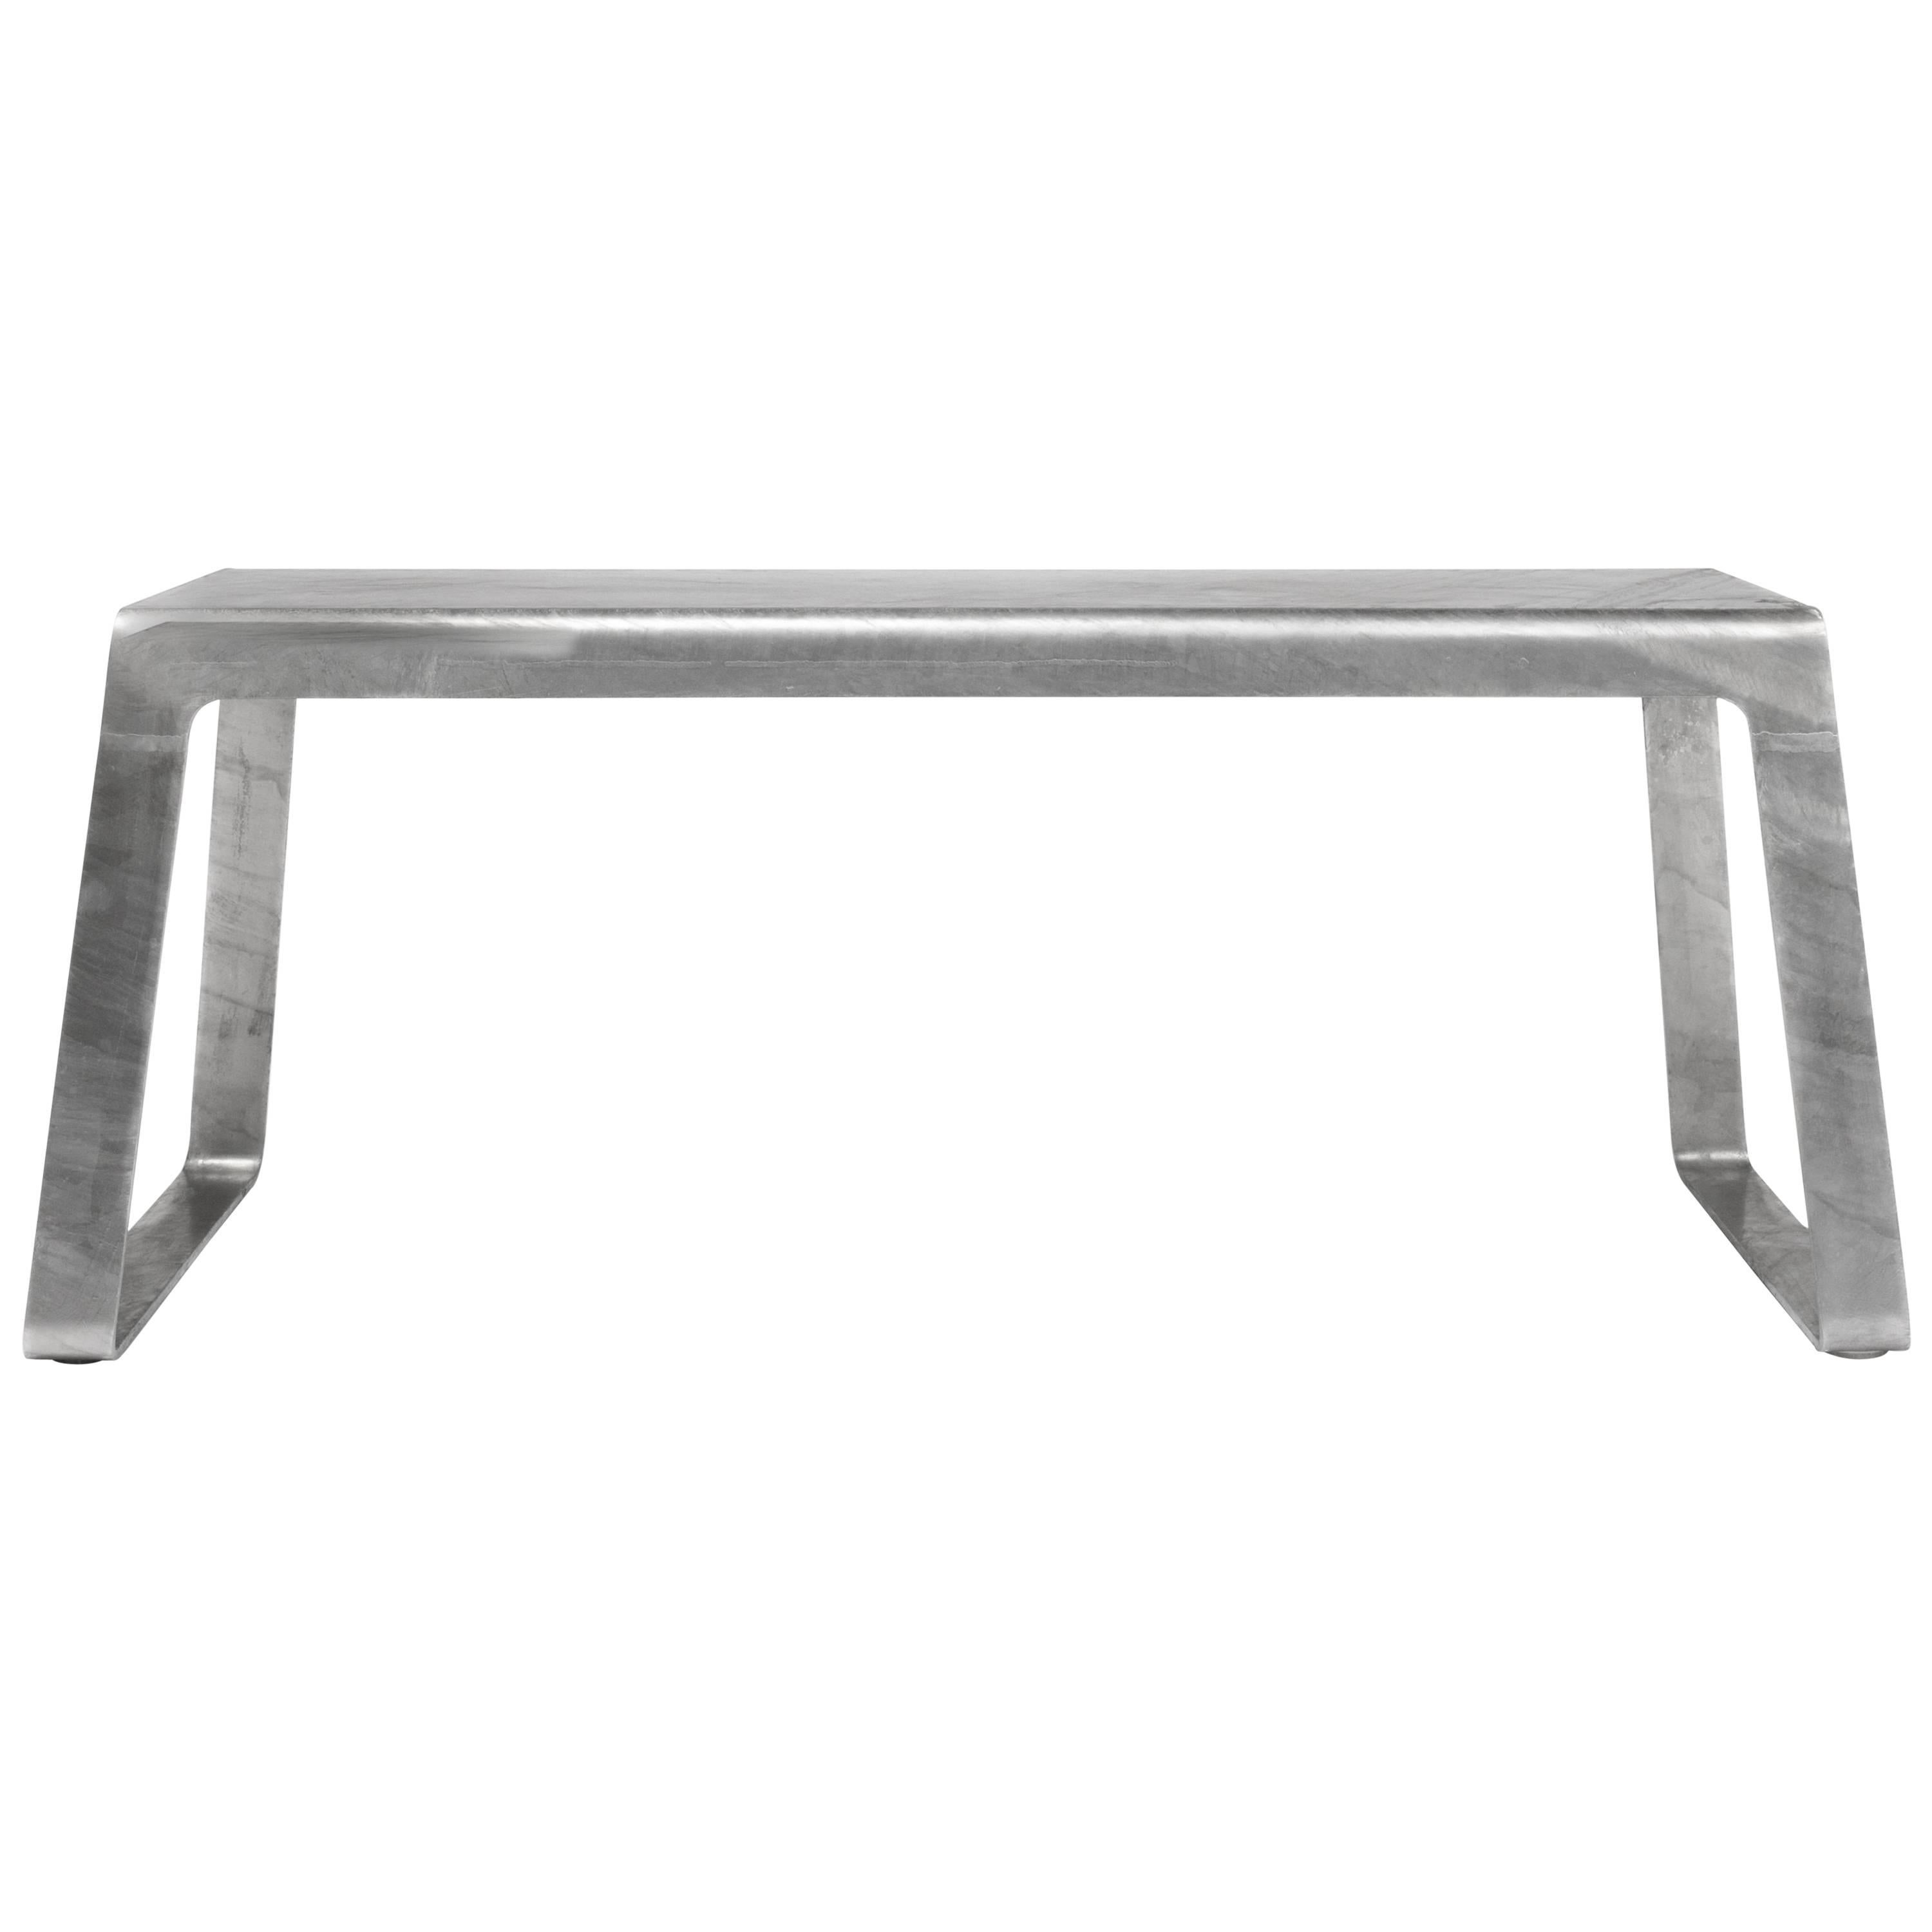 A_Bench in Hot-Dipped Galvanized Steel Plate by Jonathan Nesci